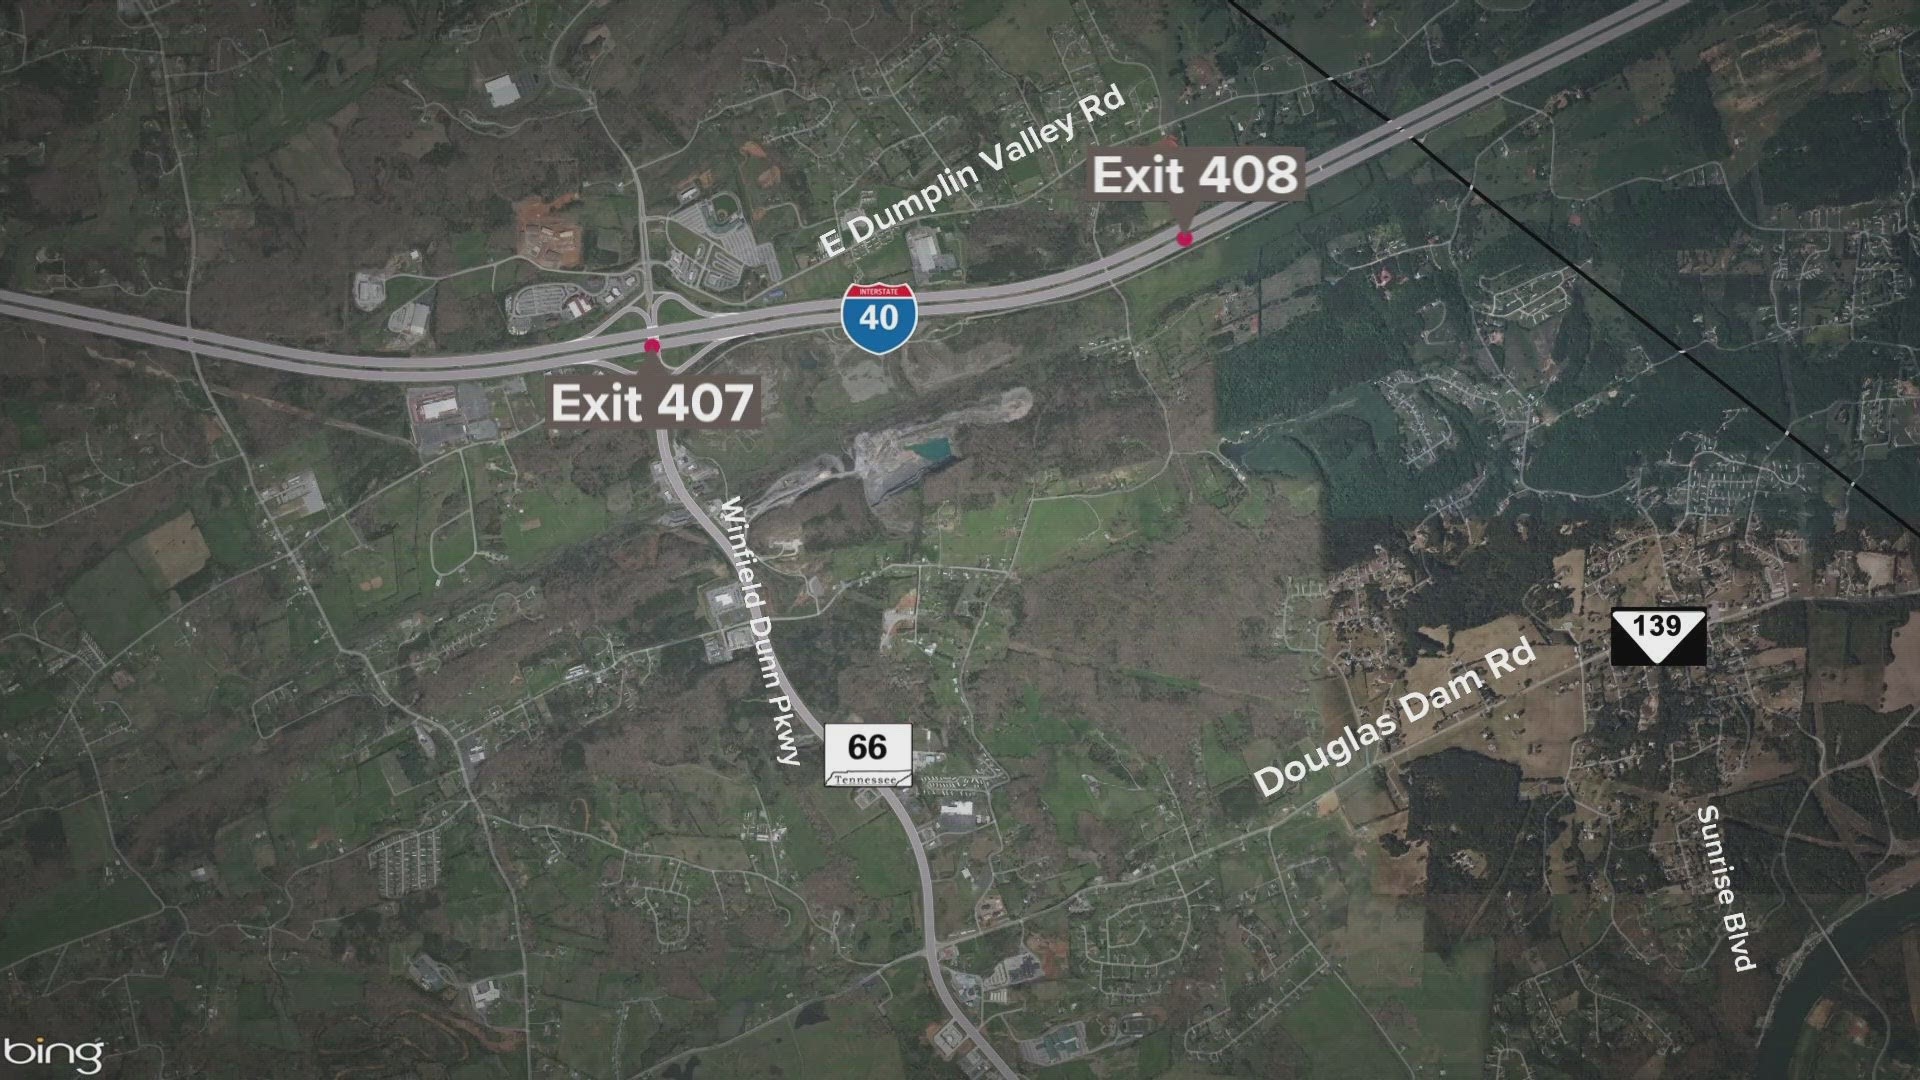 The new exit would be one mile east of the current Sevier County exit. If approved, the new exit would also be a diverging diamond interchange.